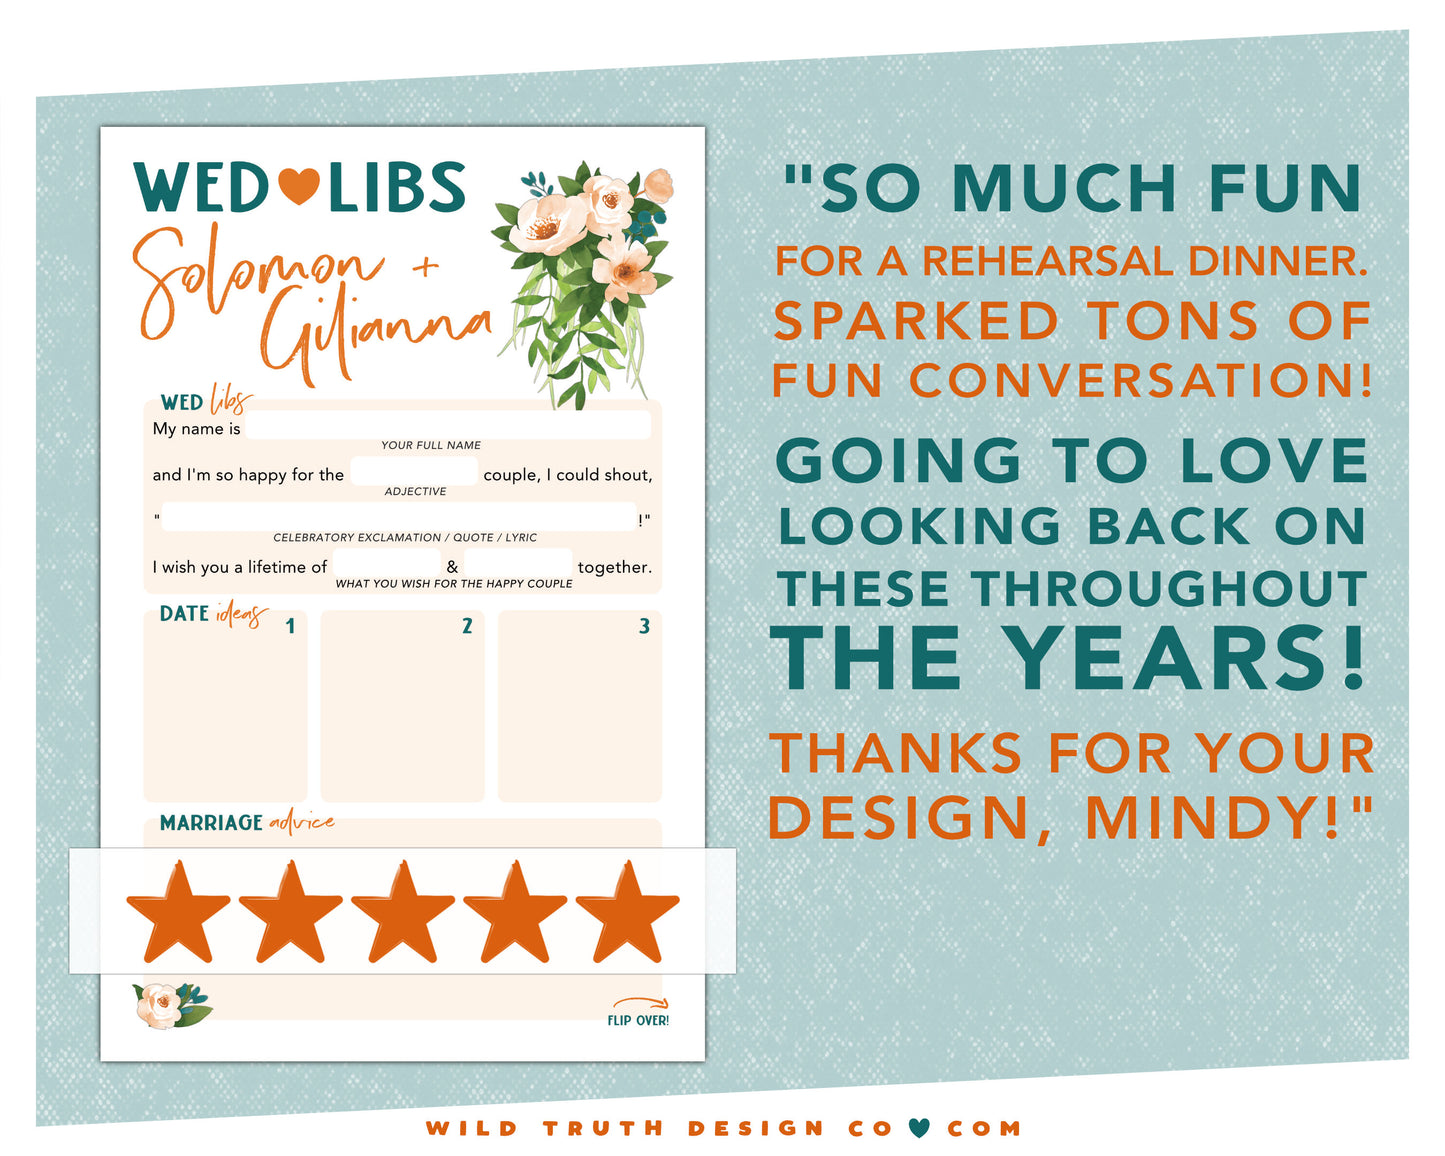 Personalized Wed Libs - Printed Cards - Well Wishes, Marriage Advice, Madlib Game - Wedding Guest Book - Floral Tropical Plants - Rehearsal Dinner - Engagement Party - Bridal Shower - Reception - Bachelorette - Couples Shower Mad Lib